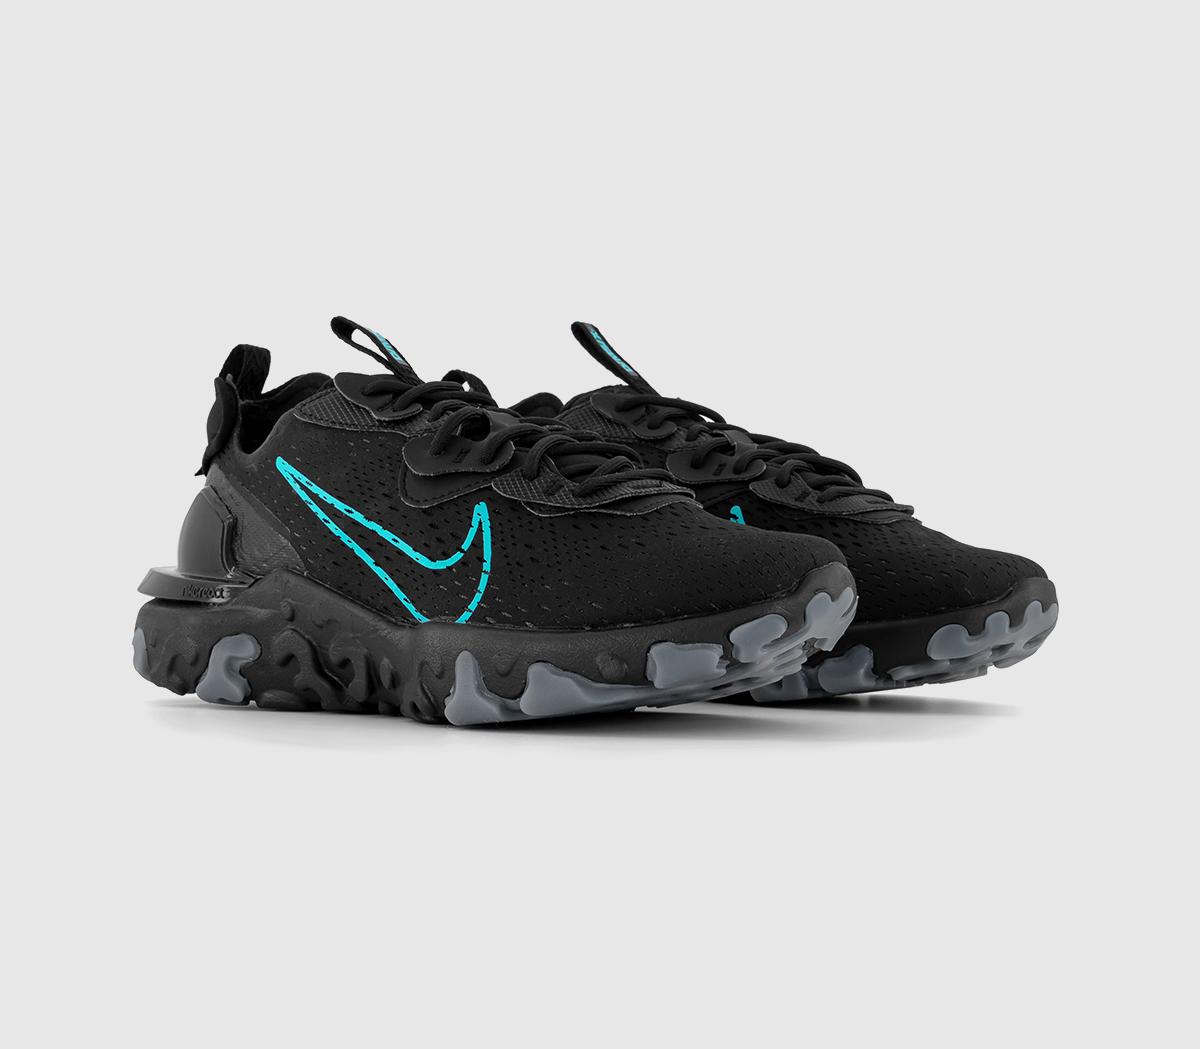 Nike React Vision Trainers Black Dusty Cactus Cool Grey, 7.5